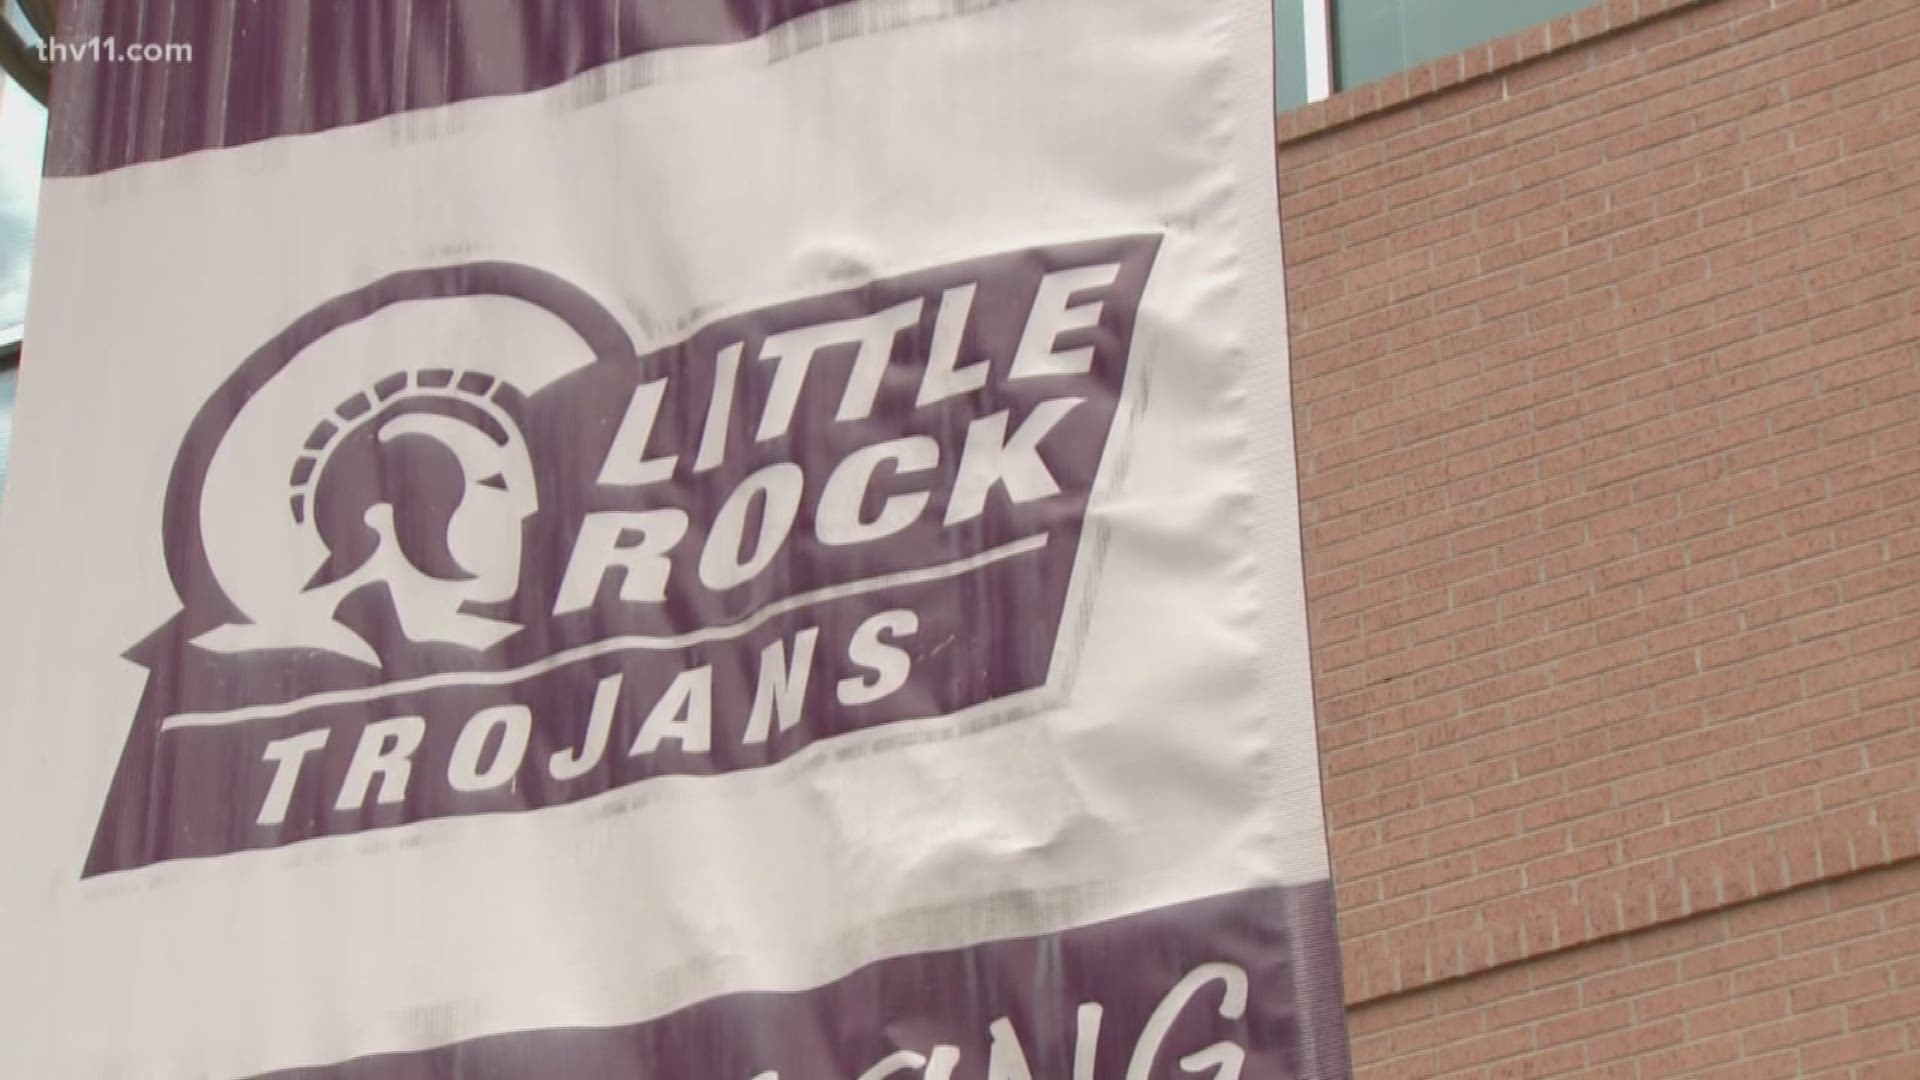 UA-Little Rock's Director of Athletics is resigning to take a job in Texas.